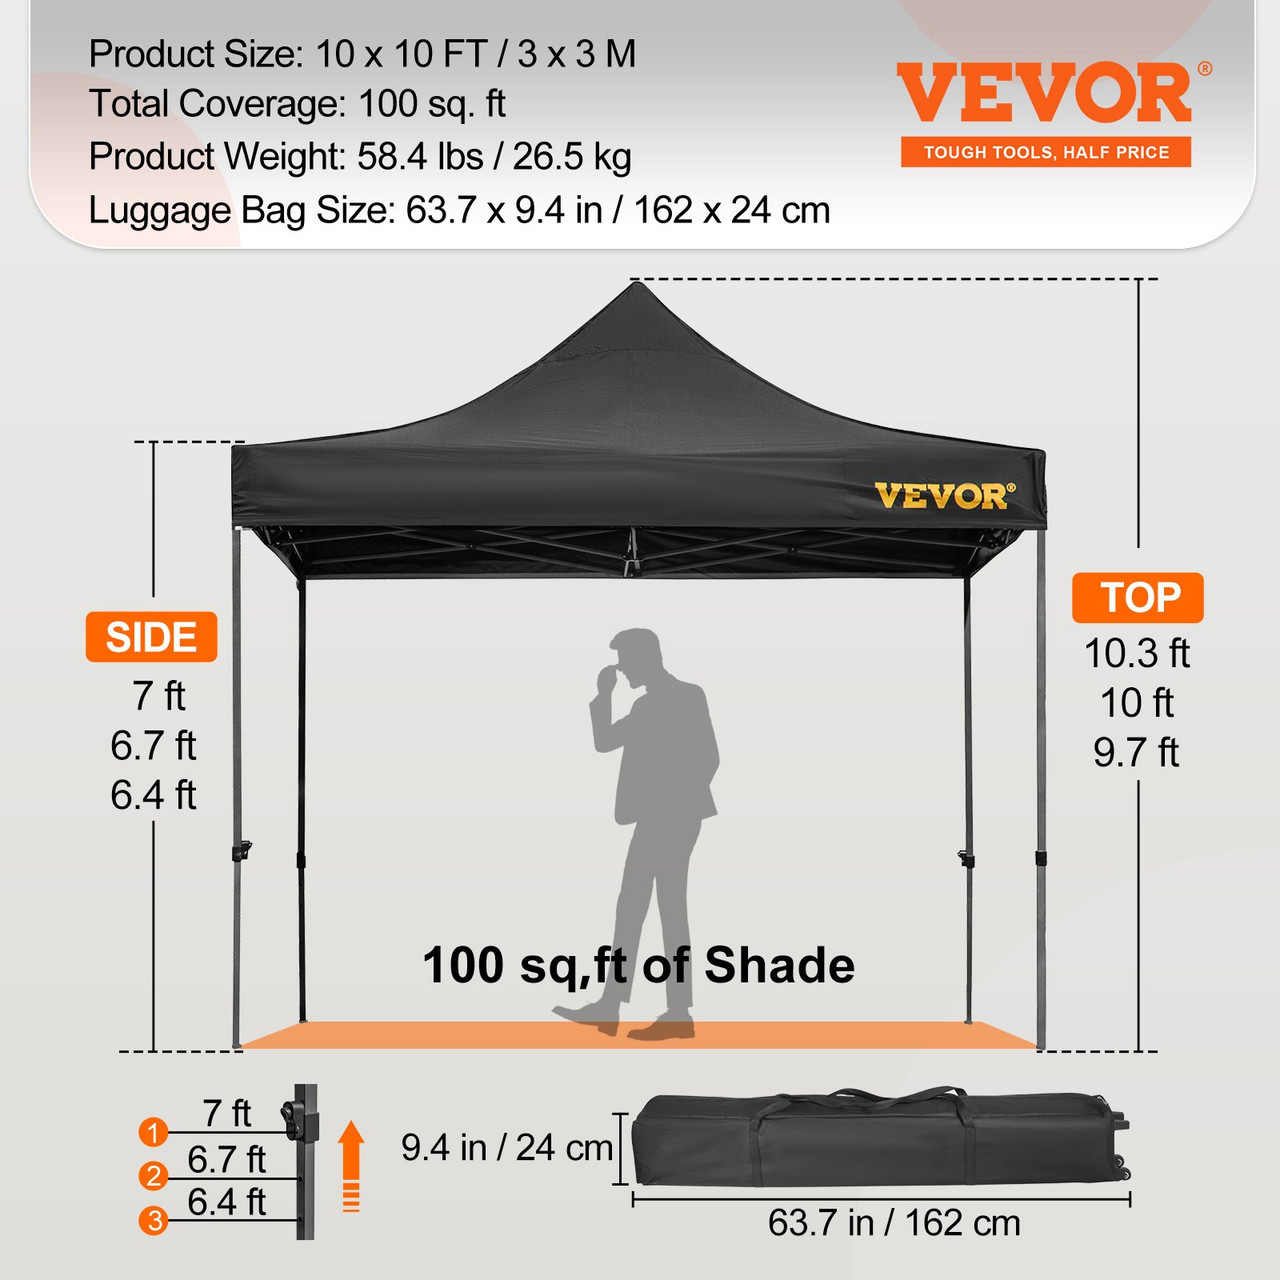 Pop Up Canopy Tent, 10 x 10 FT, Outdoor Patio Gazebo Tent with Removable Sidewalls and Wheeled Bag, UV Resistant Waterproof Instant Gazebo Shelter for Party, Garden, Backyard, Black